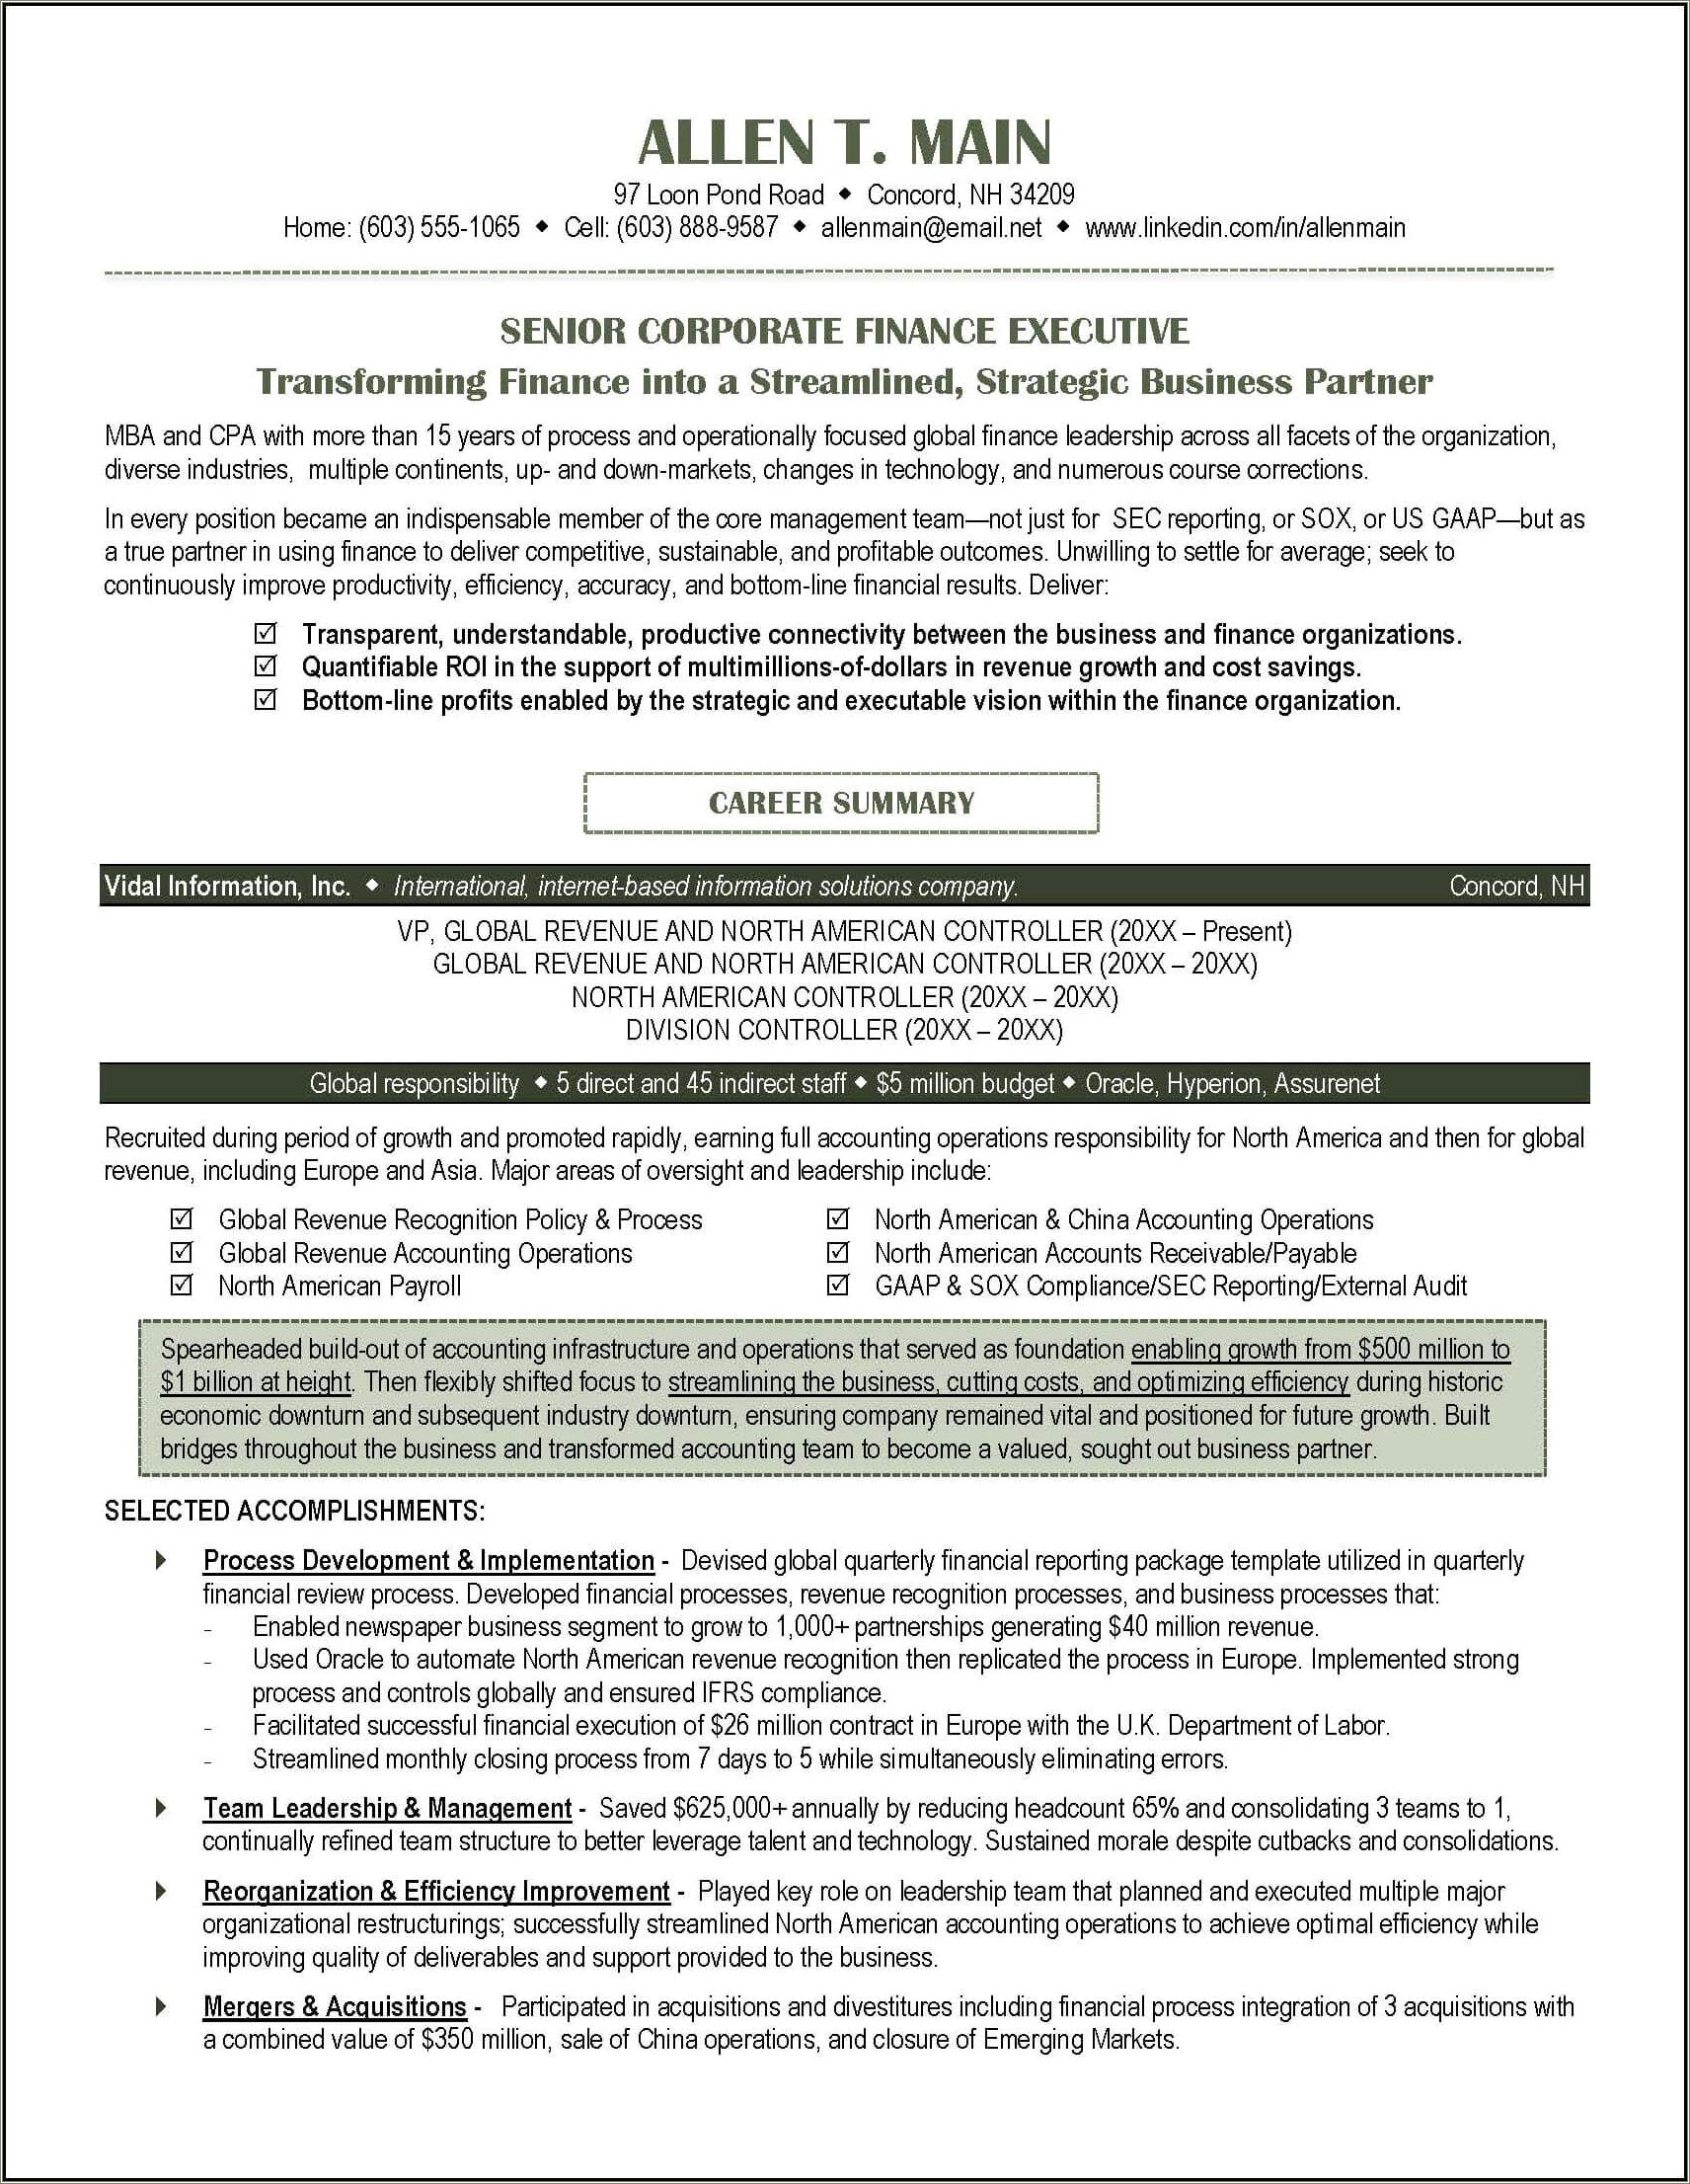 Resume Explains Employment Gap In Resume Objective